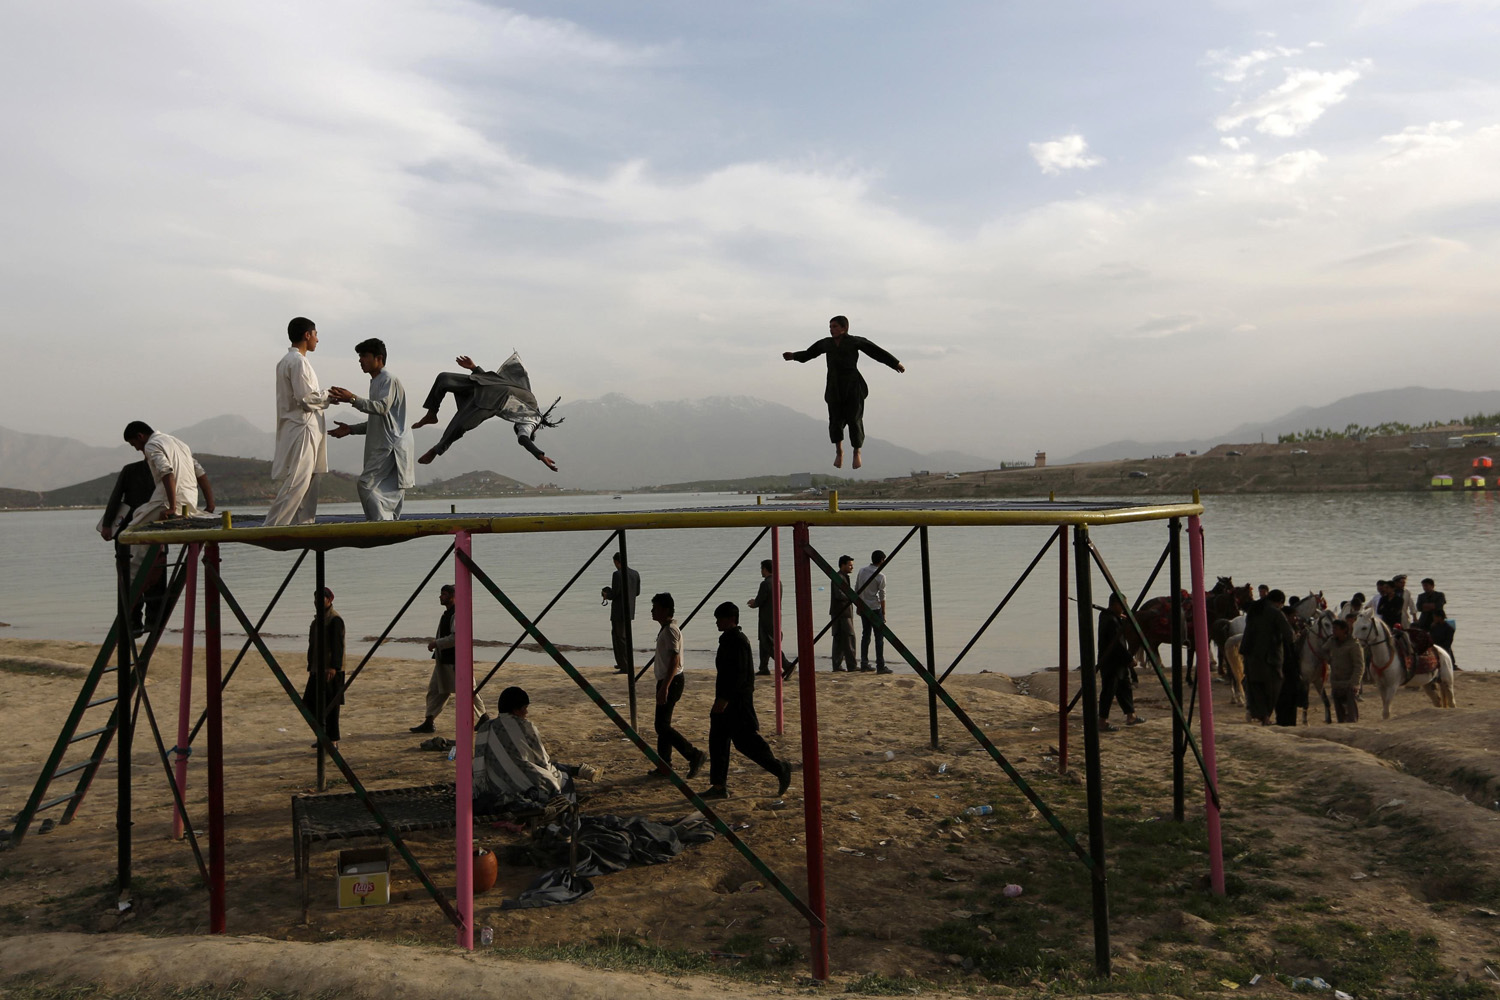 Afghans play on a trampoline along Qargha Lake, on the outskirts of Kabul